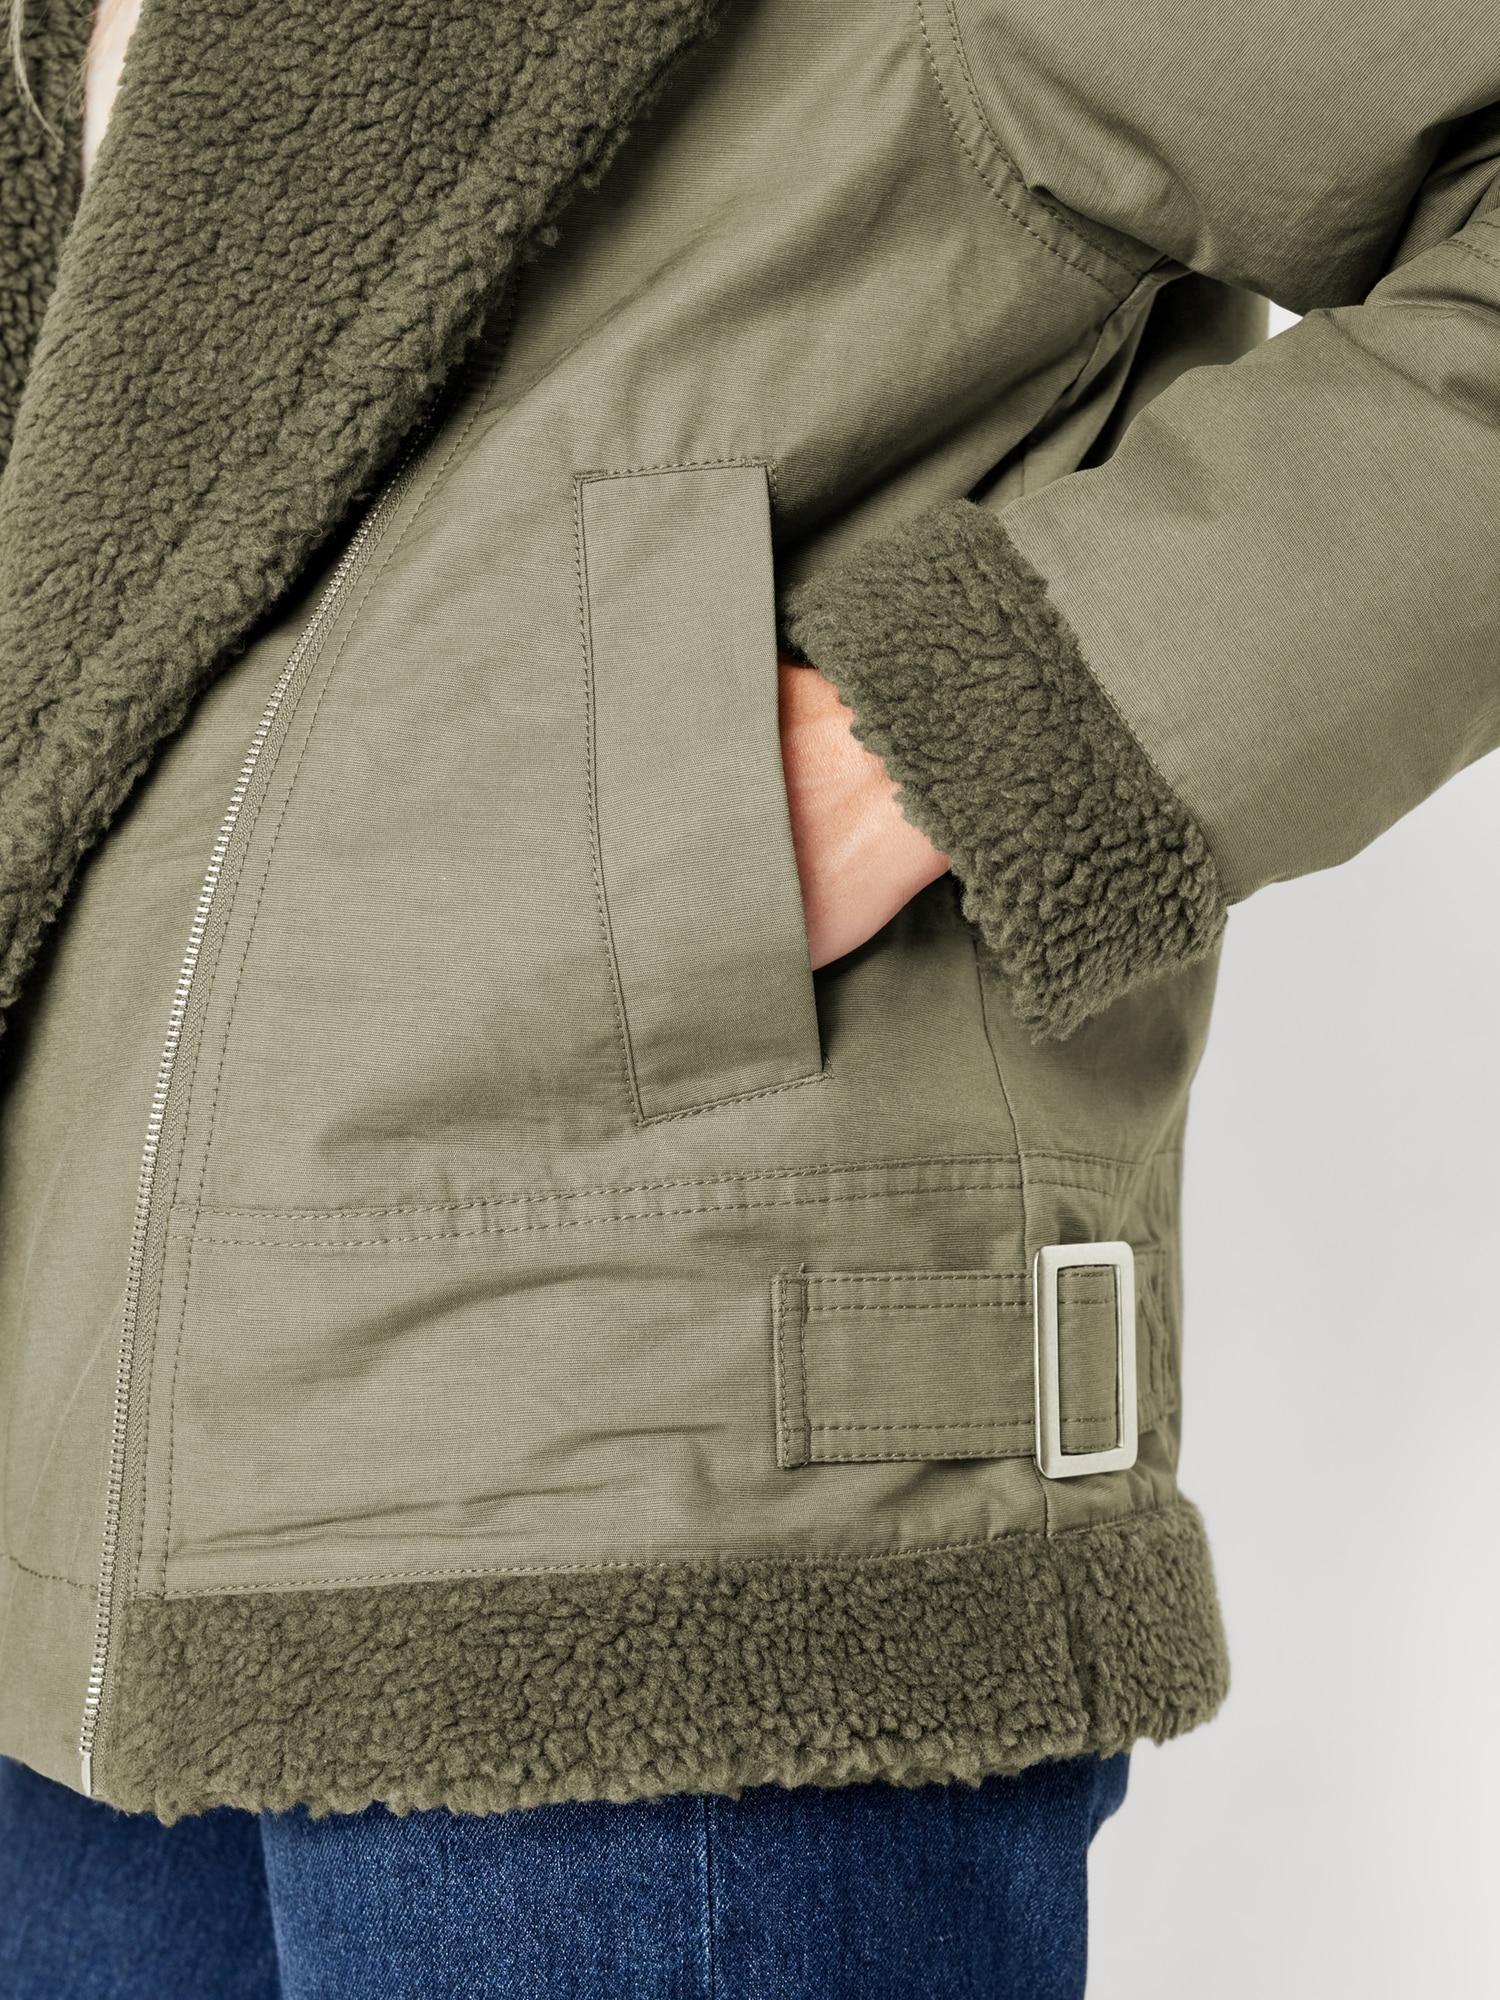 Old Sherpa-Lined for Utility Navy Jacket | Women